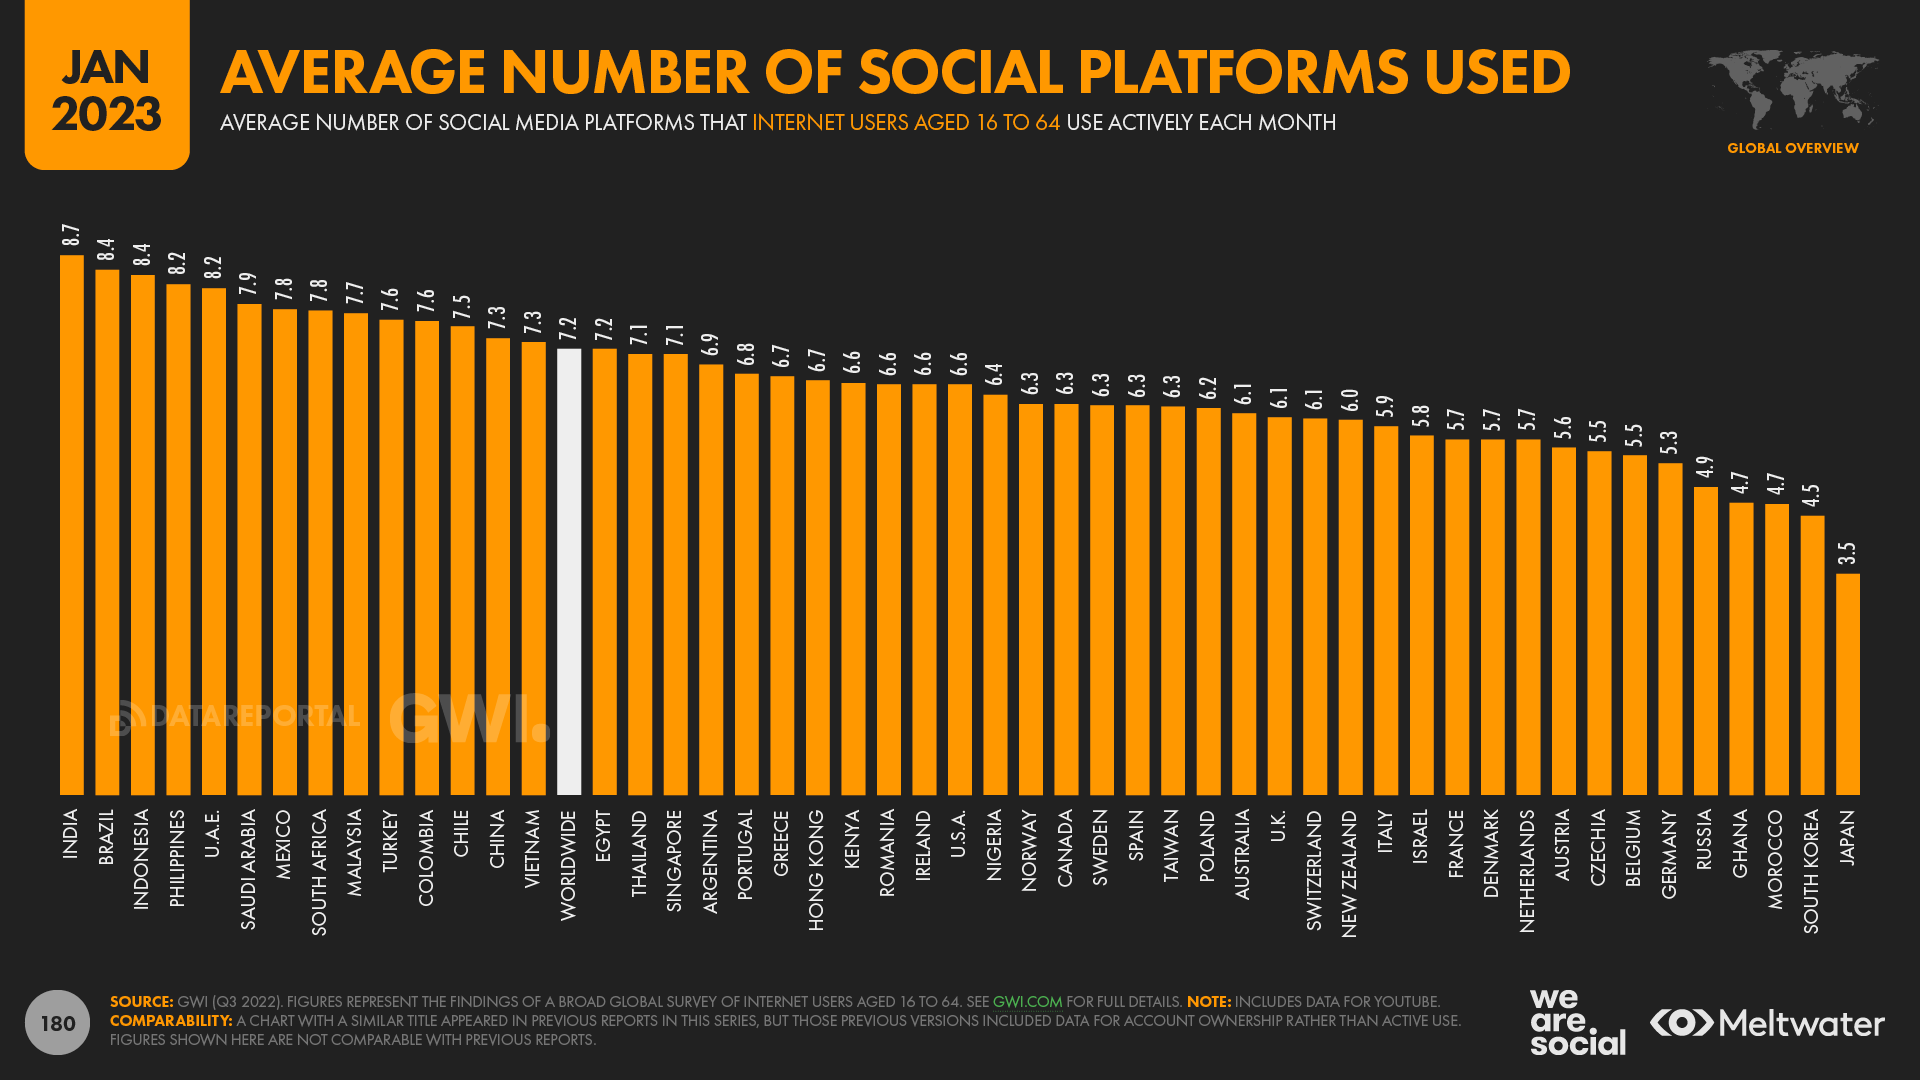 Average number of social platforms that internet users aged 16 to 64 used each month